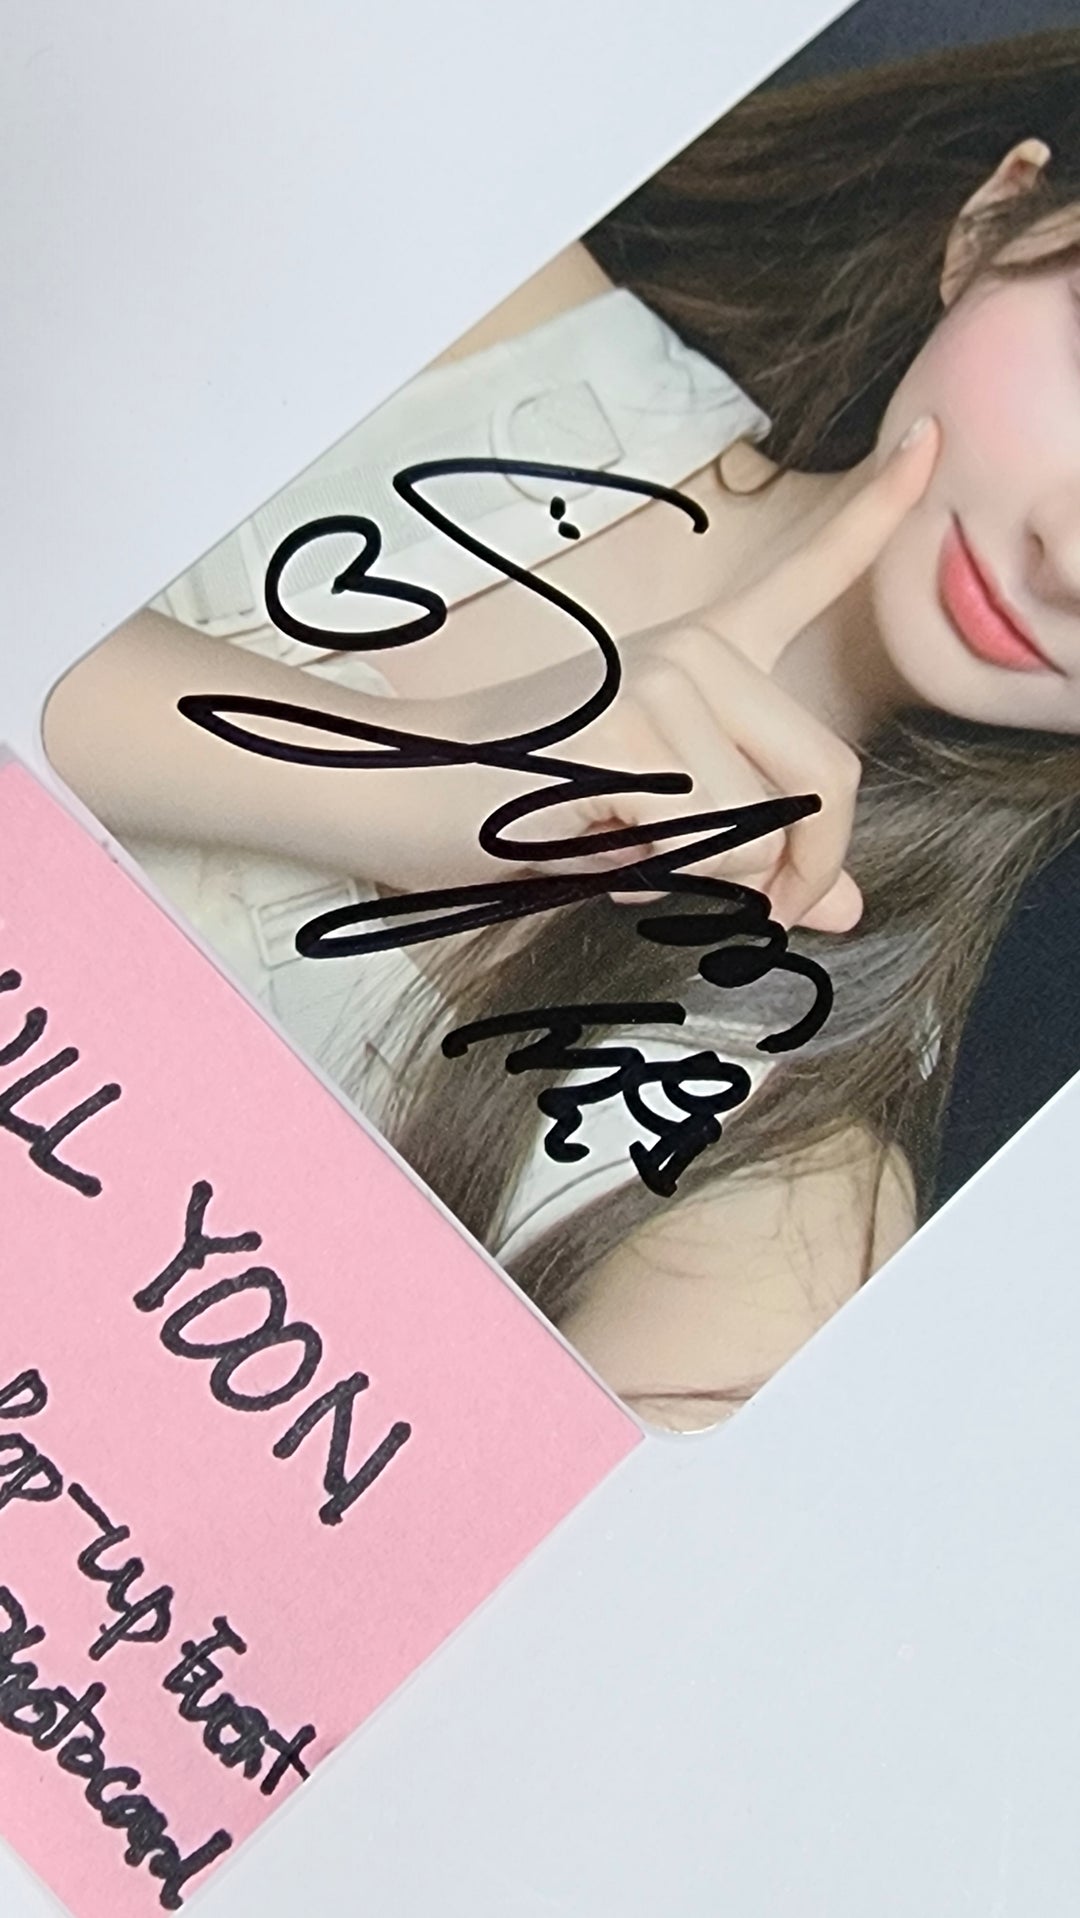 Sullyoon (Of NMIXX) "A Midsummer NMIXX’s Dream" - Hand Autographed(Signed) Photocard